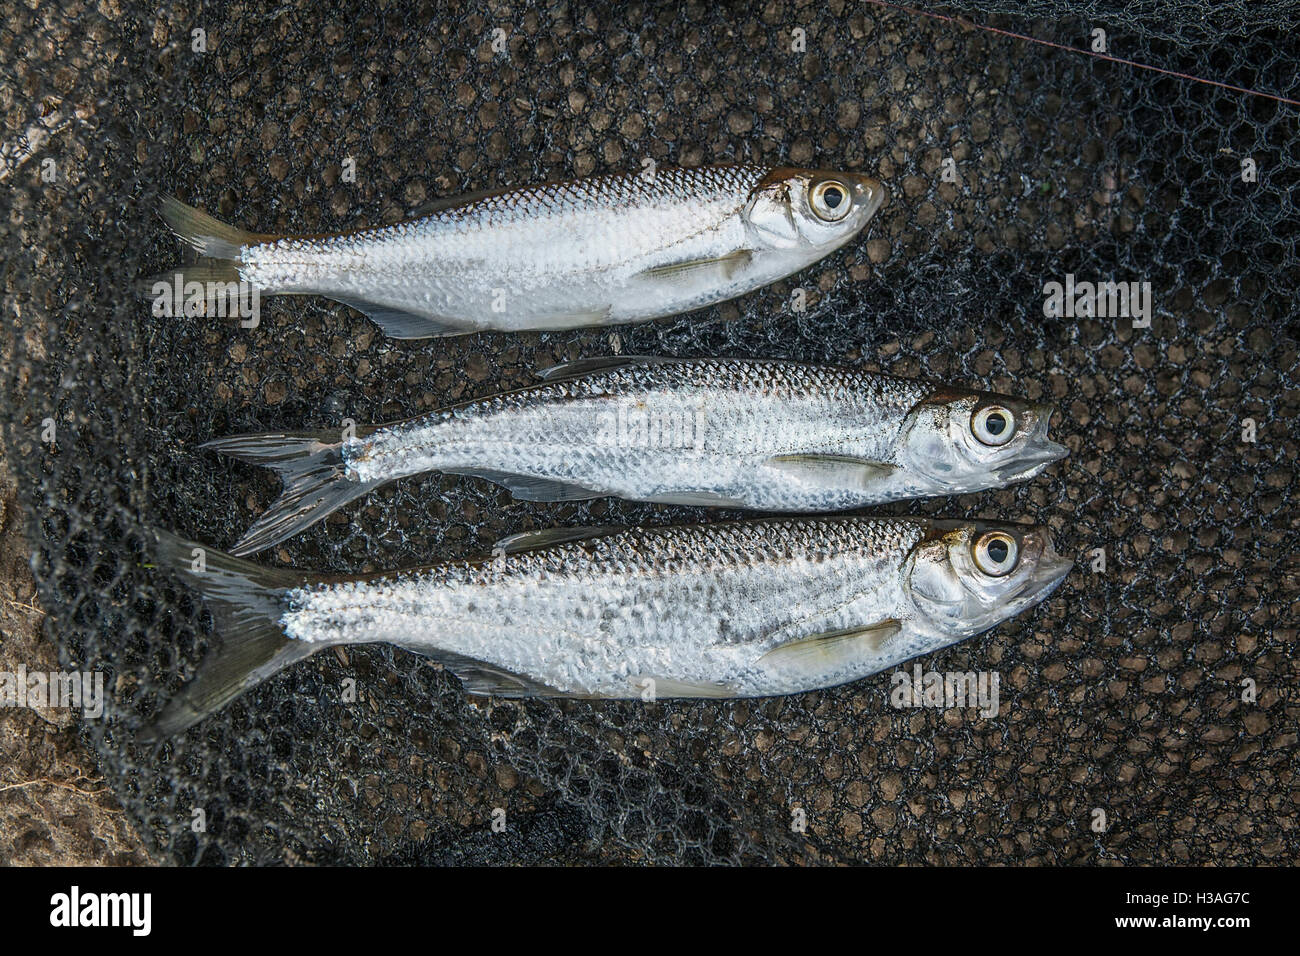 Freshwater fish just taken from the water. Several ablet or bleak fish, roach and bream fish natural background. Stock Photo